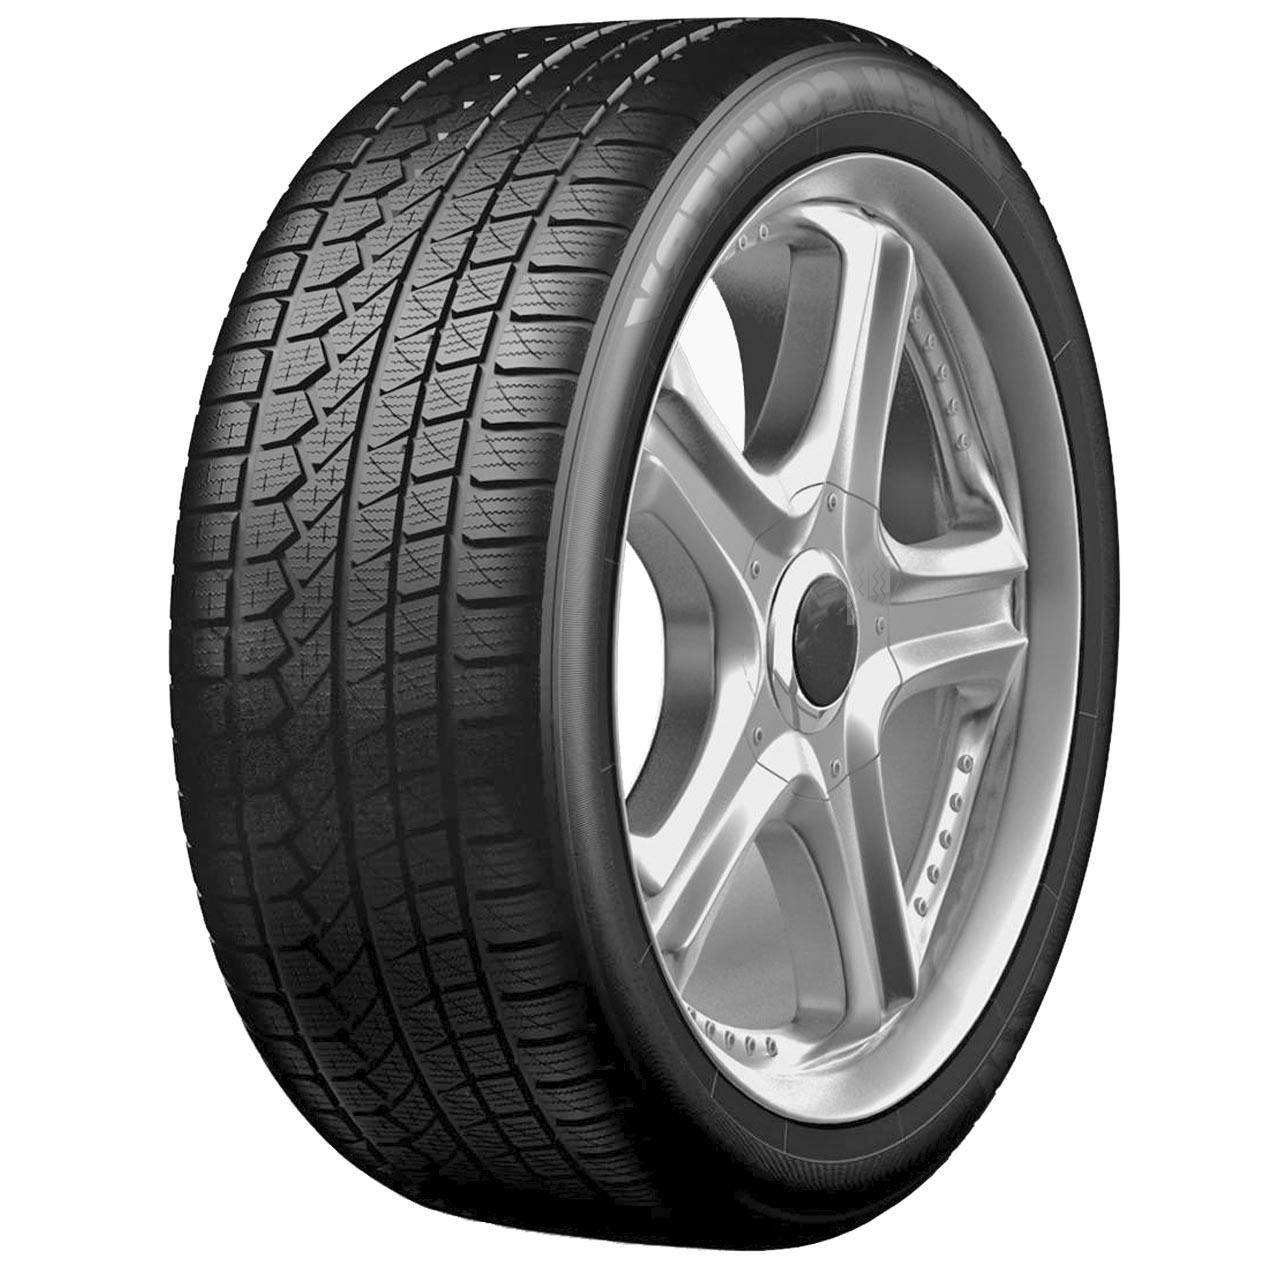 Toyo 215/70R15 98T Open Country W/T TL